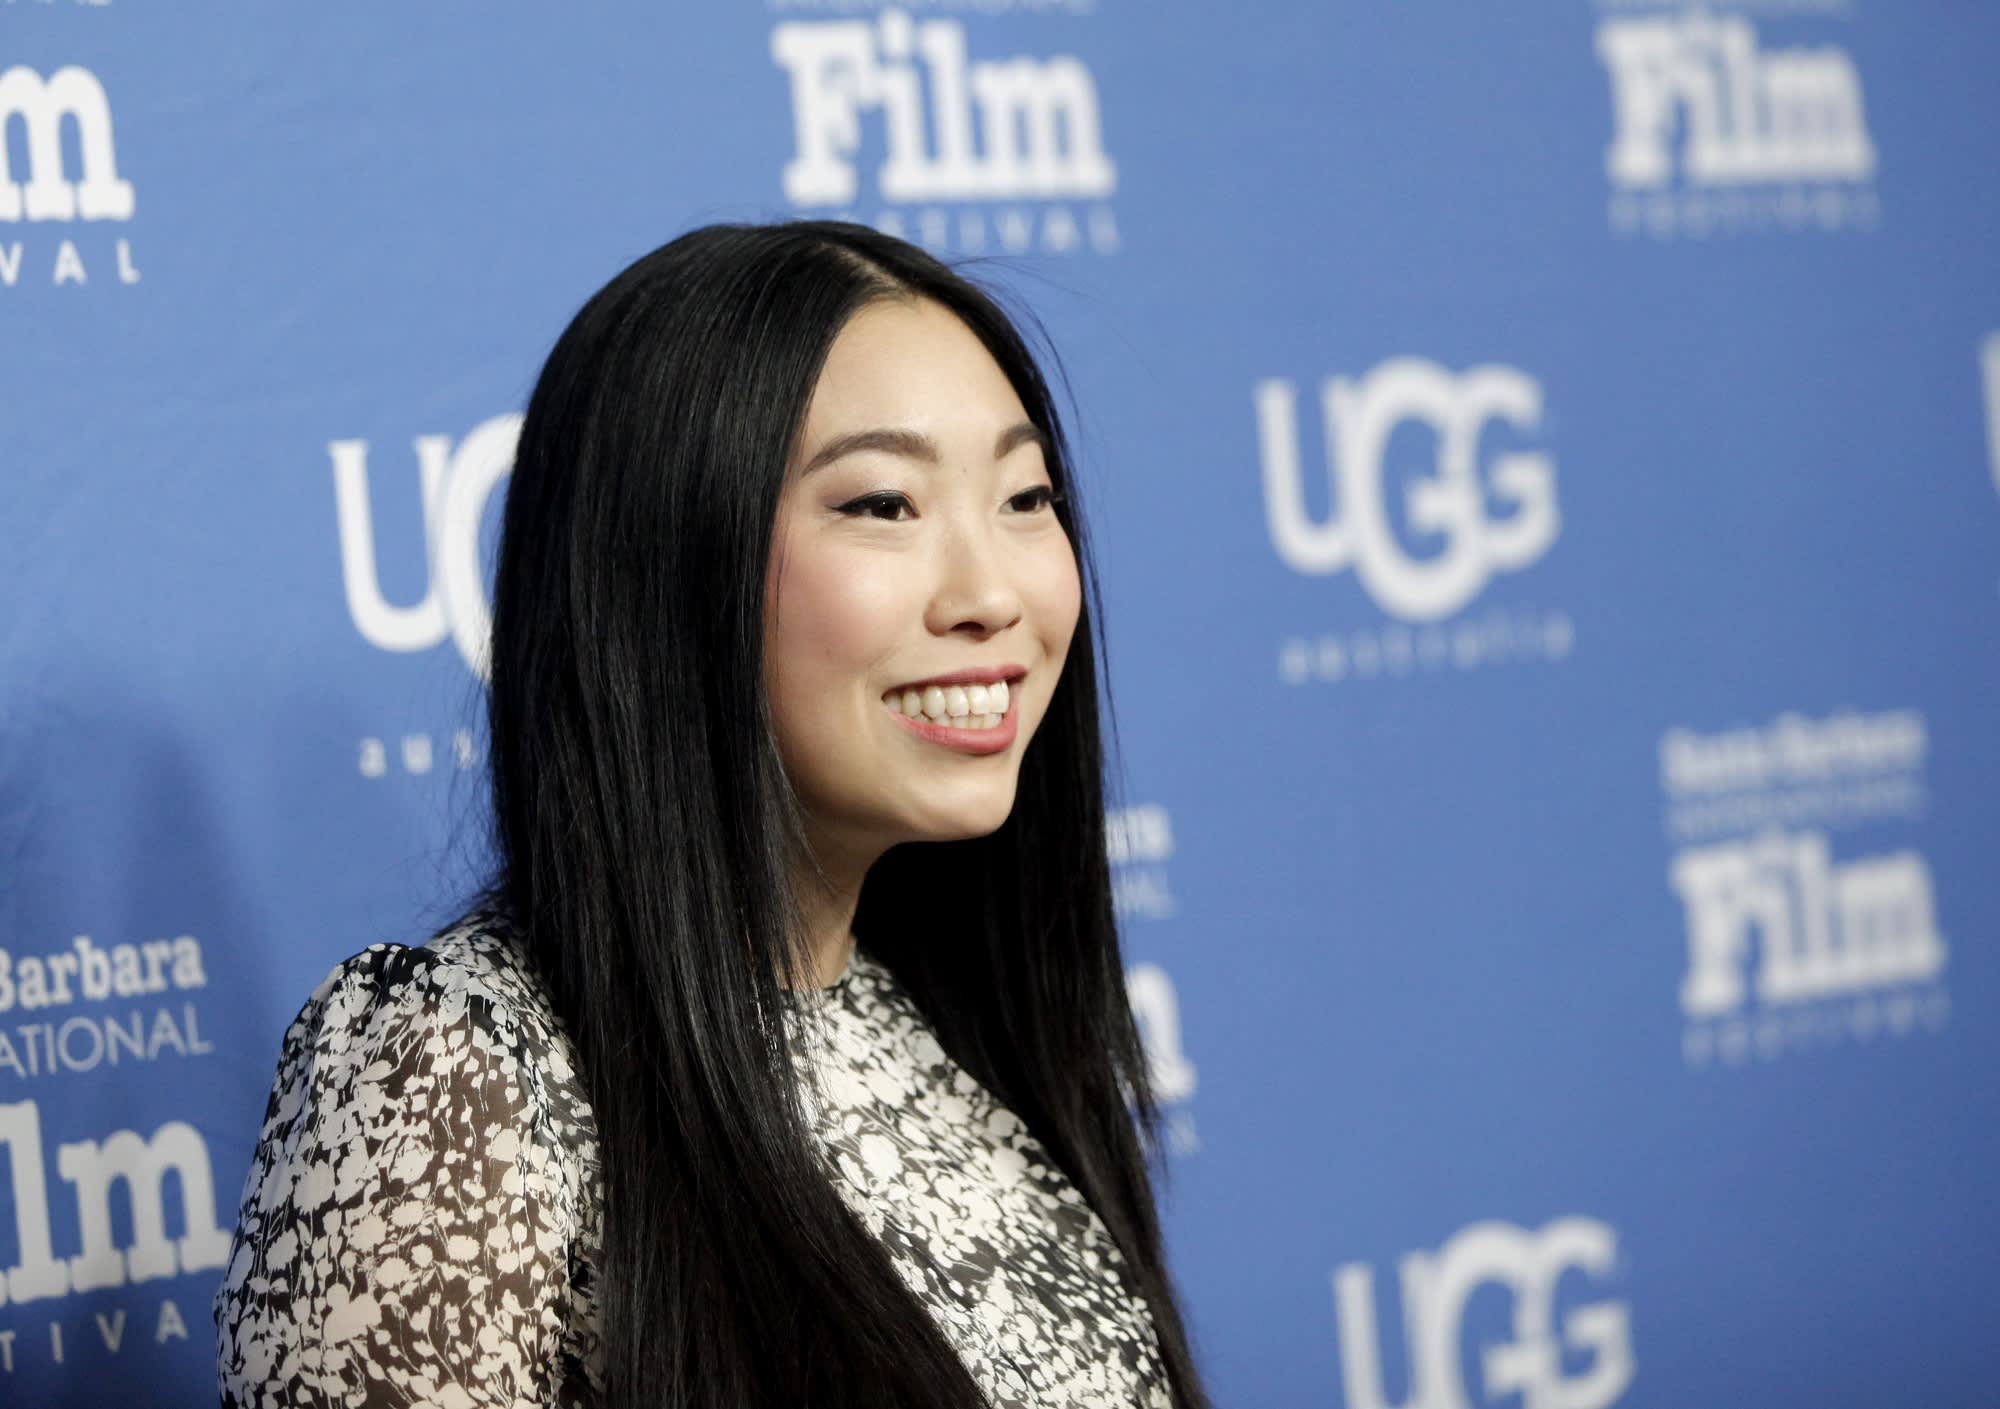 Awkwafina still lives with a ‘All I need is $ 500 a month’ mentality